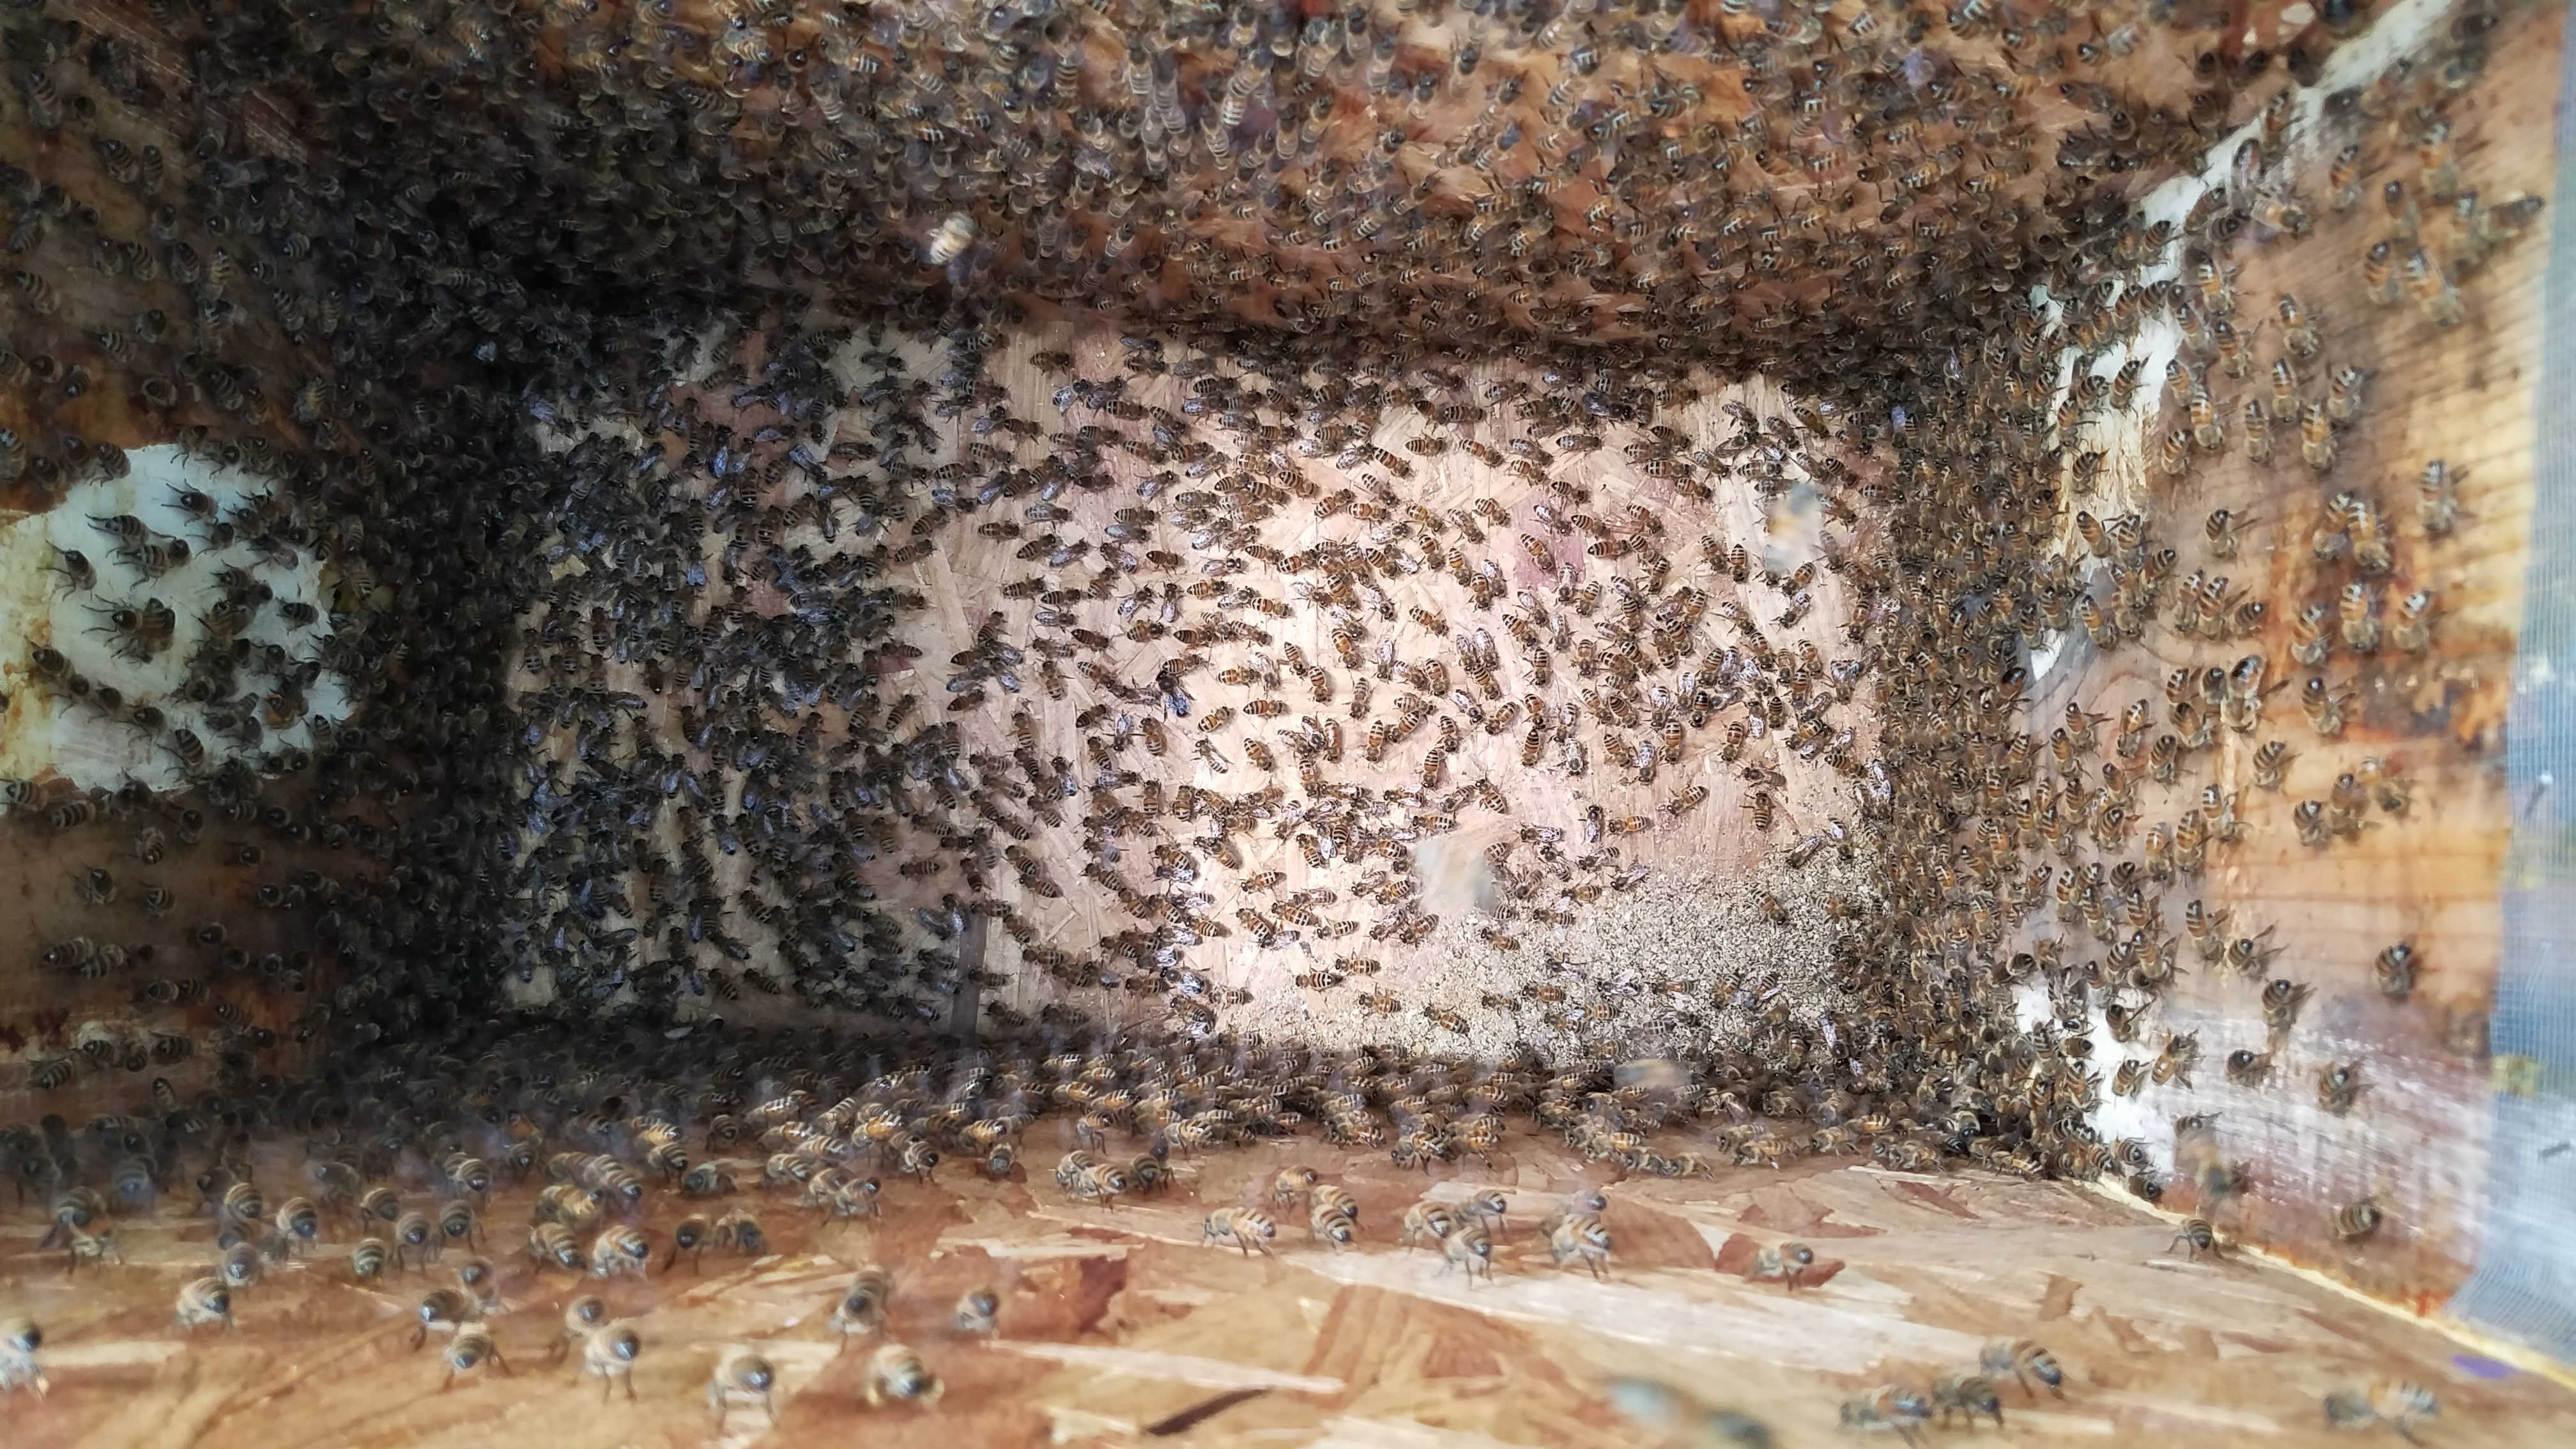 Bees from the swarm